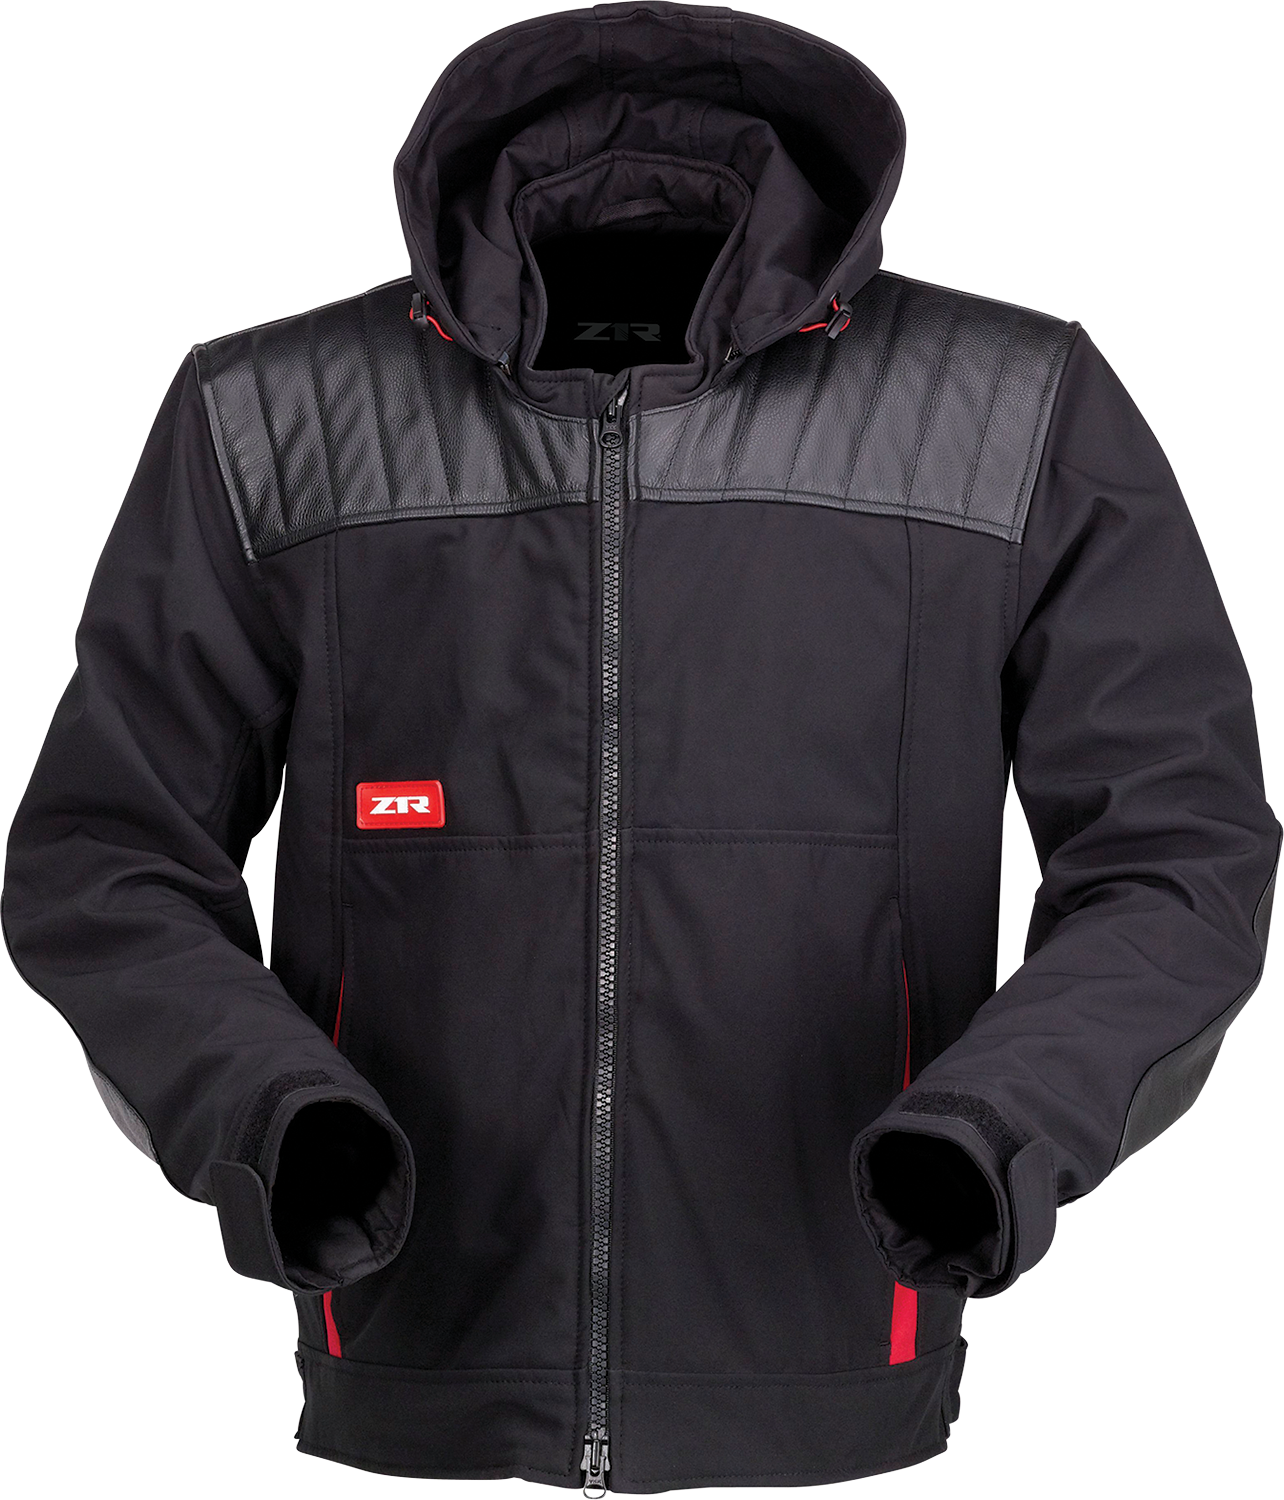 Z1R Armored Jacket - Black/Red - 5XL 2820-6216